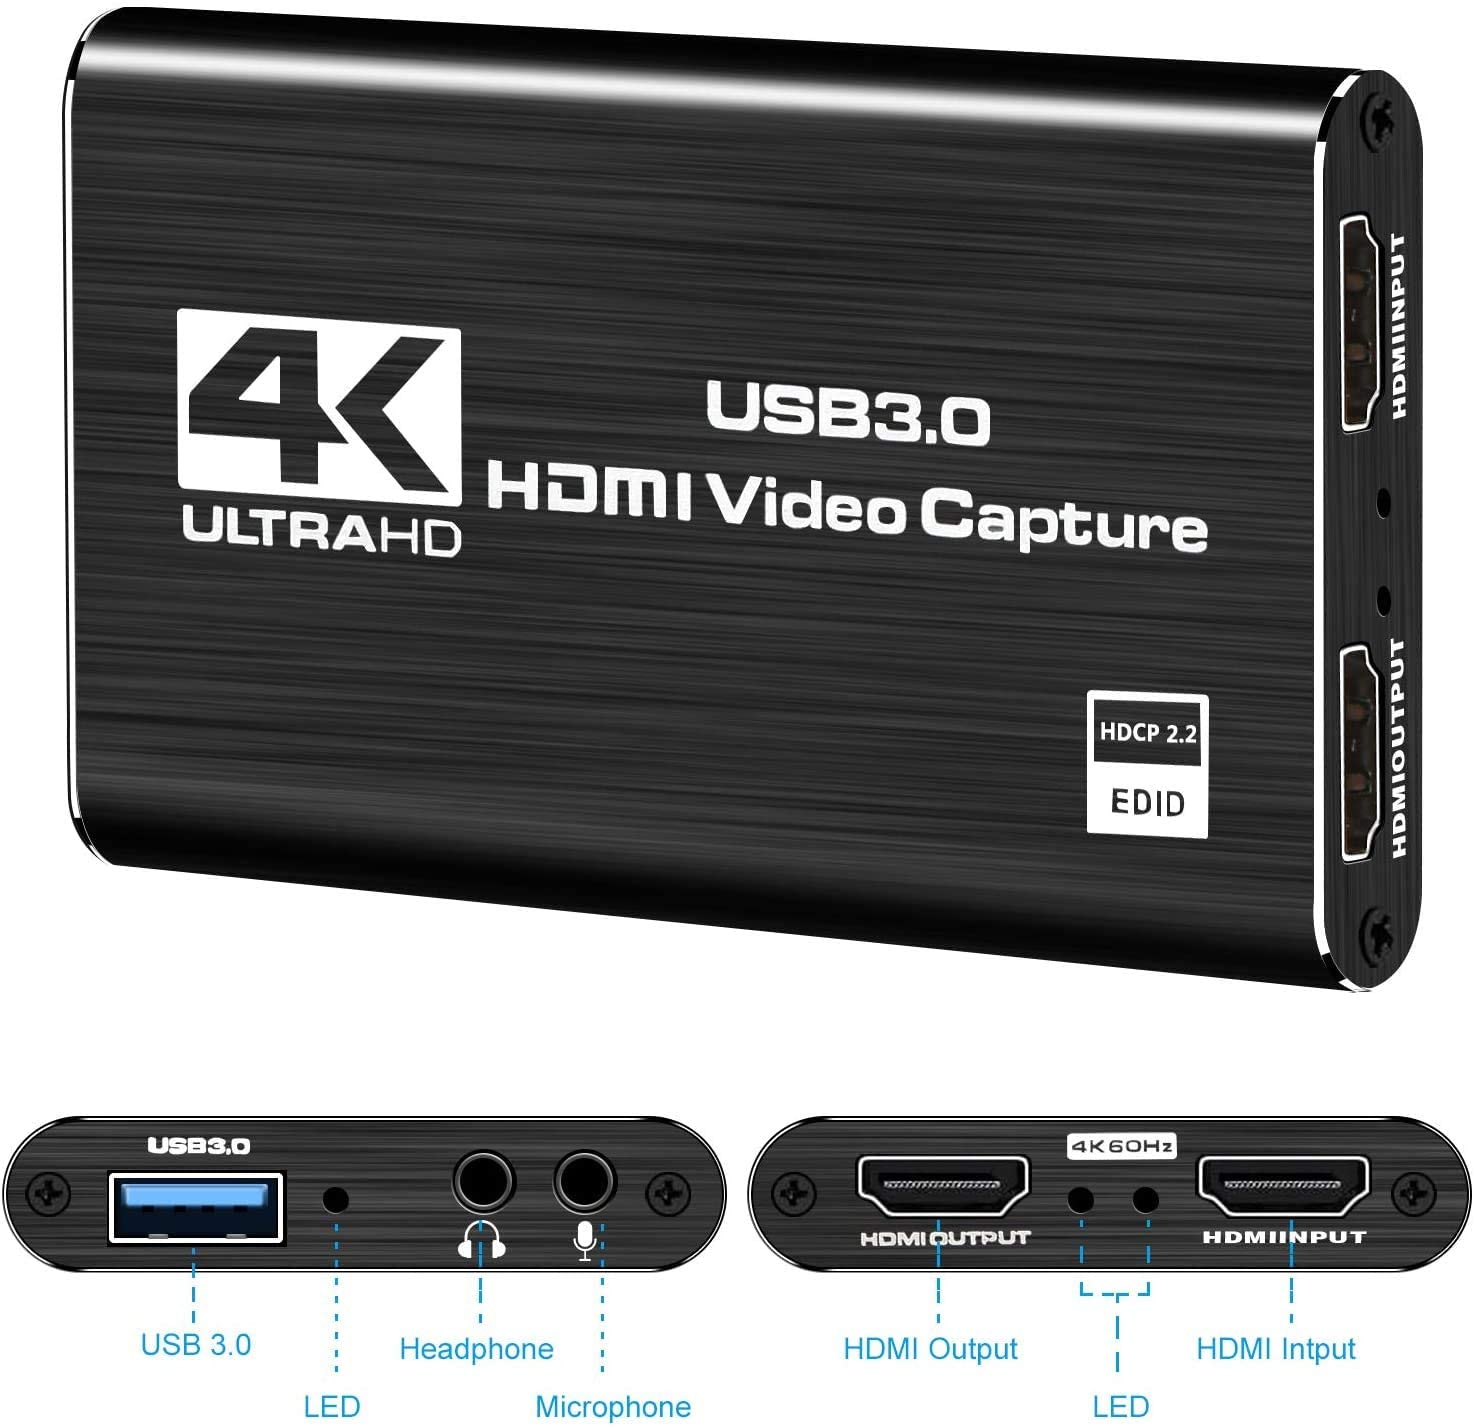 DIGITNOW 4K Audio Video Capture Card, HDMI USB 3.0 Video Capture Device, Full HD 1080P 60FPS for